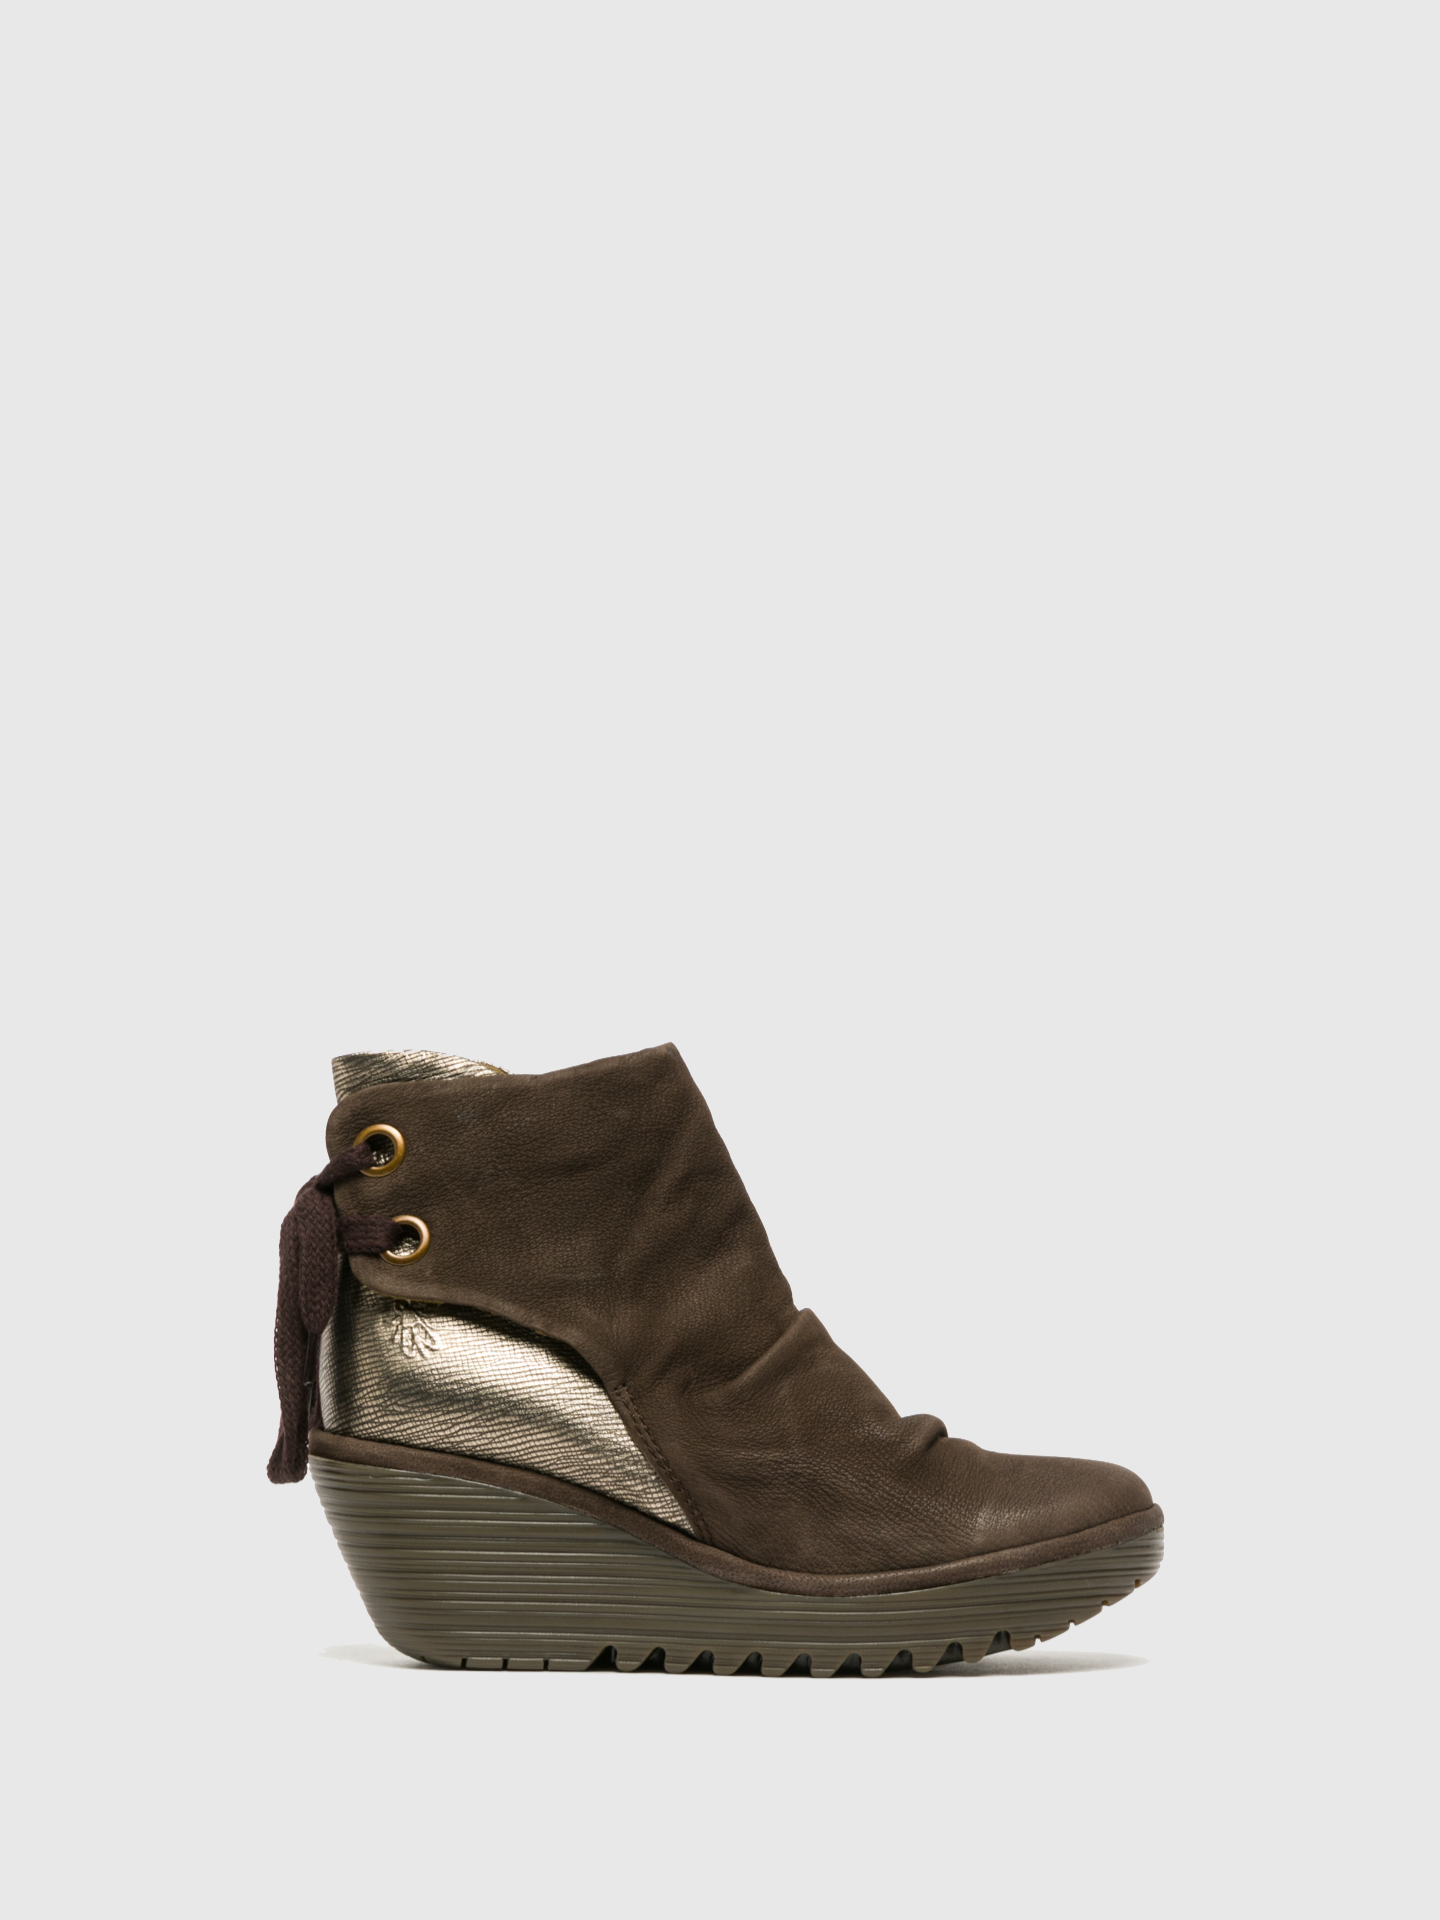 Fly London SandyBrown Wedge Ankle Boots